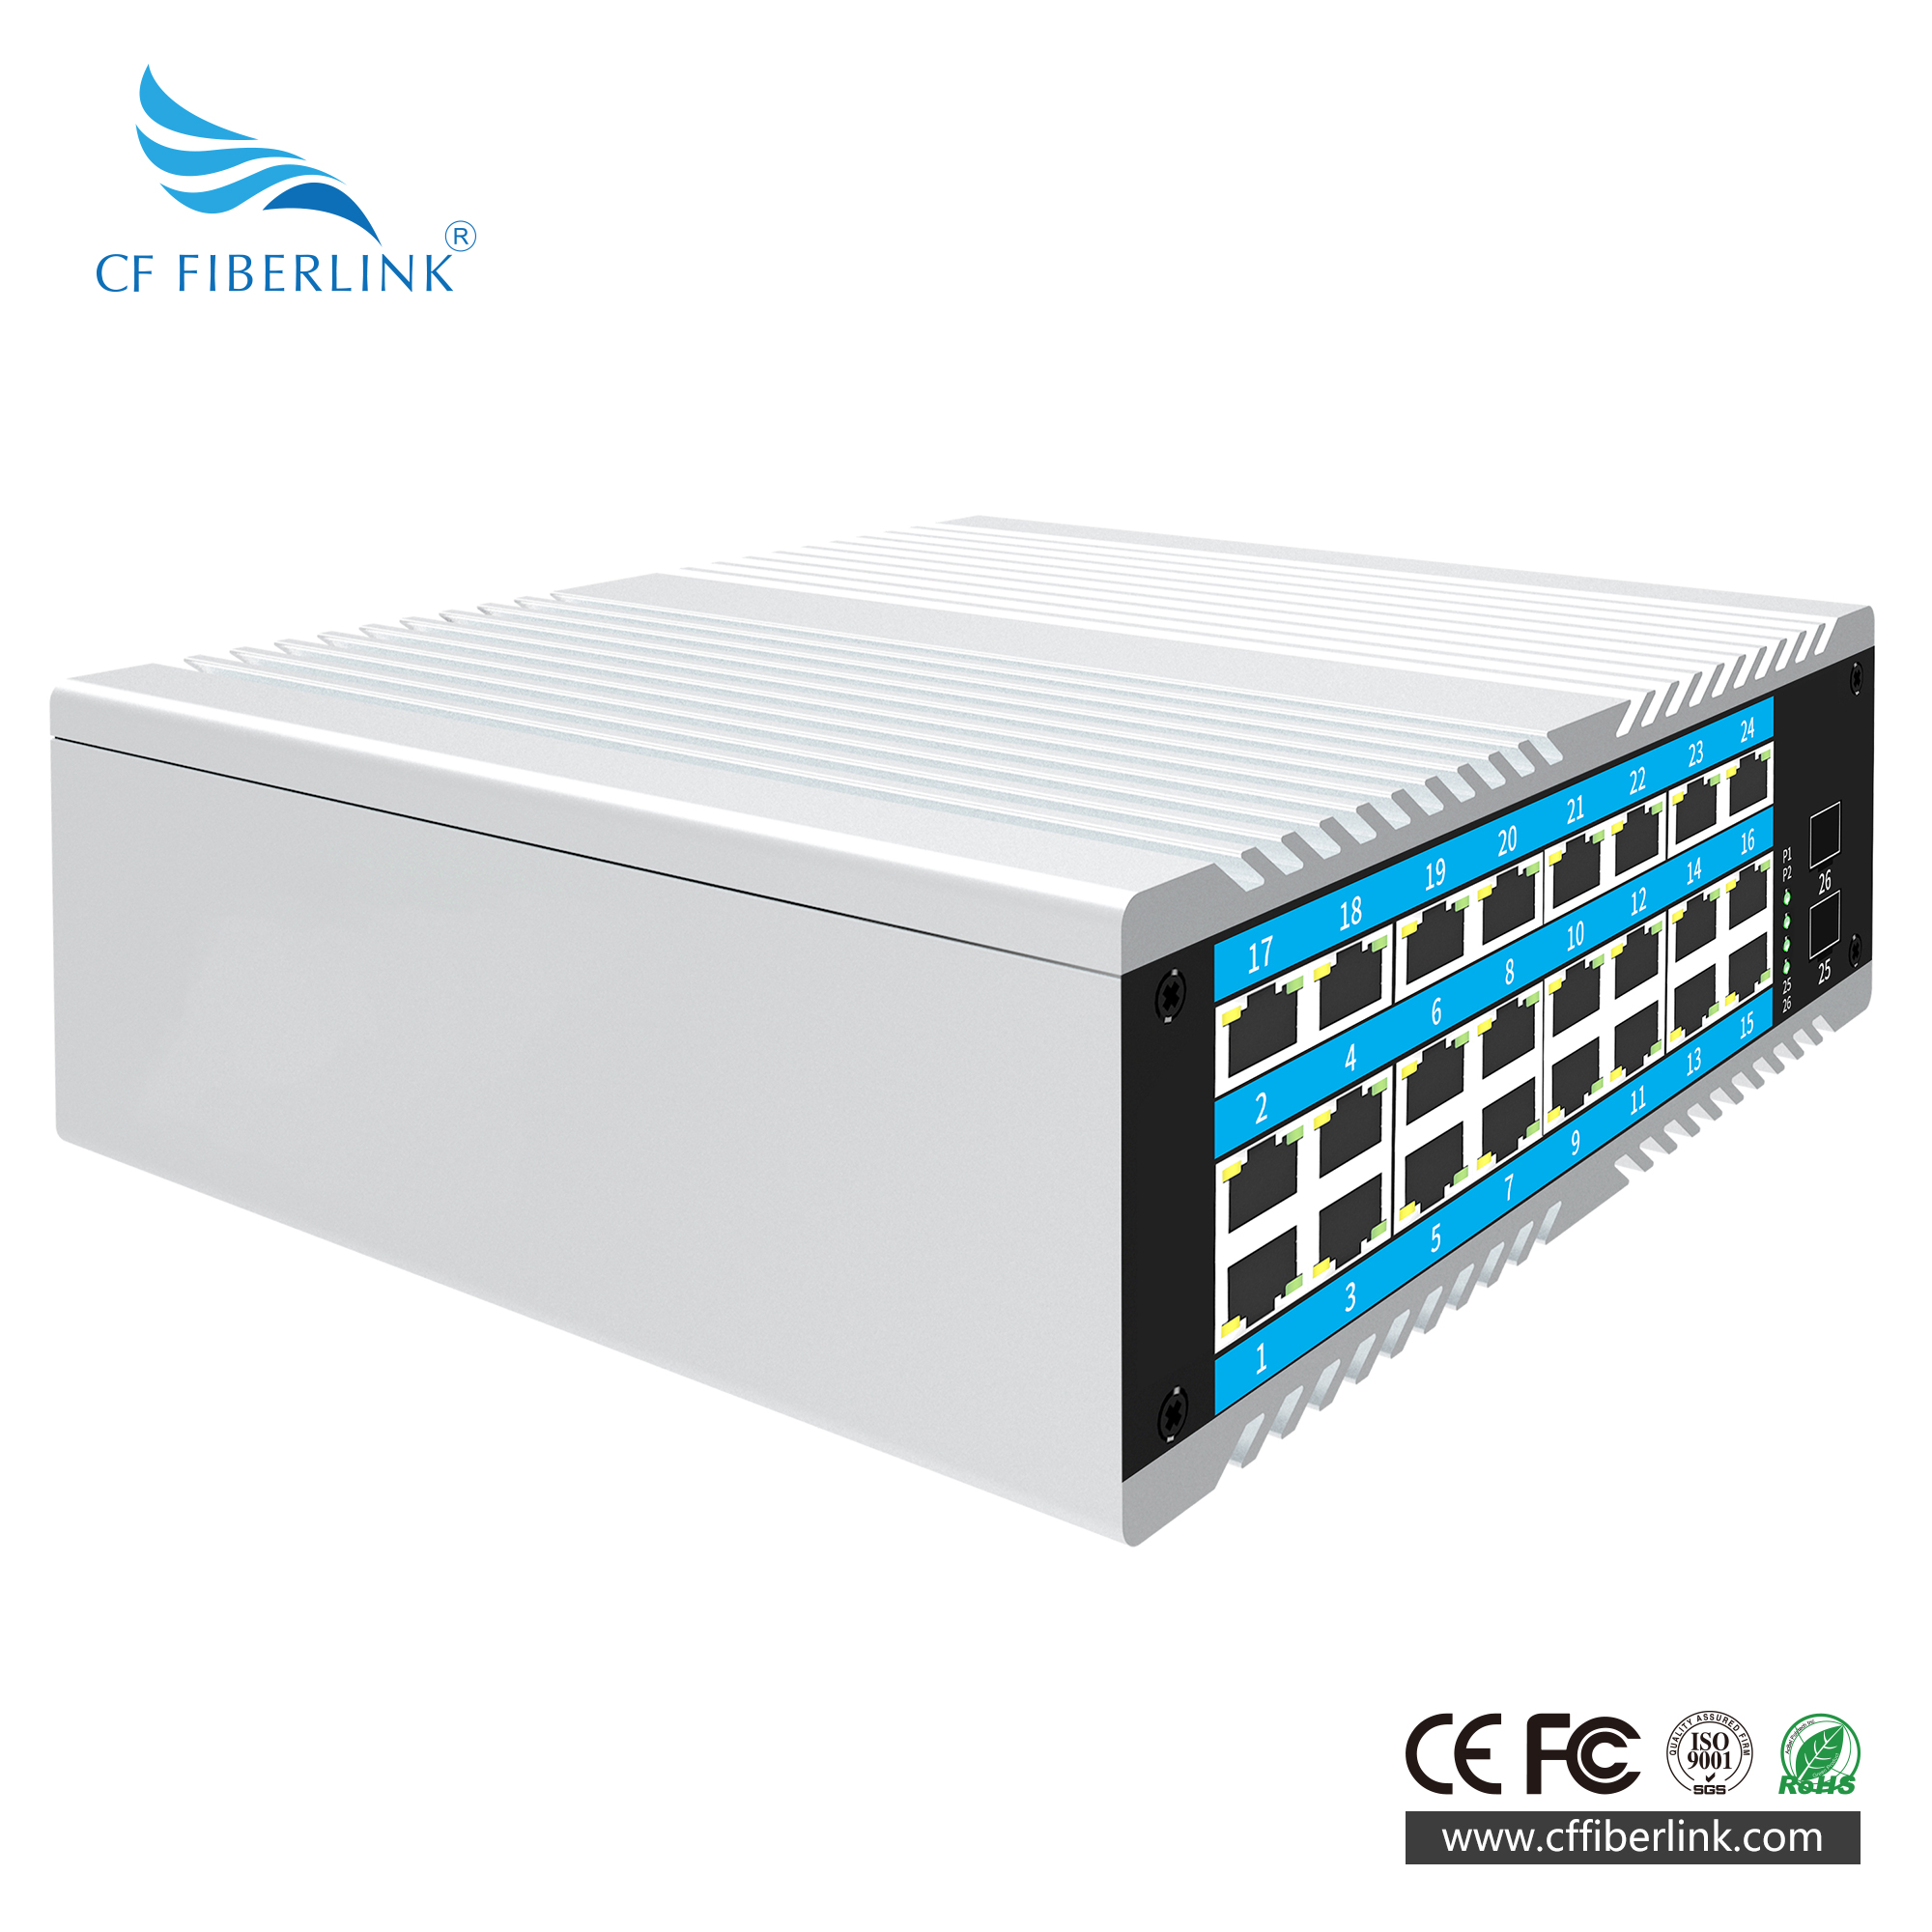 26-port 10/100M/1000M Industrial Ethernet Switch